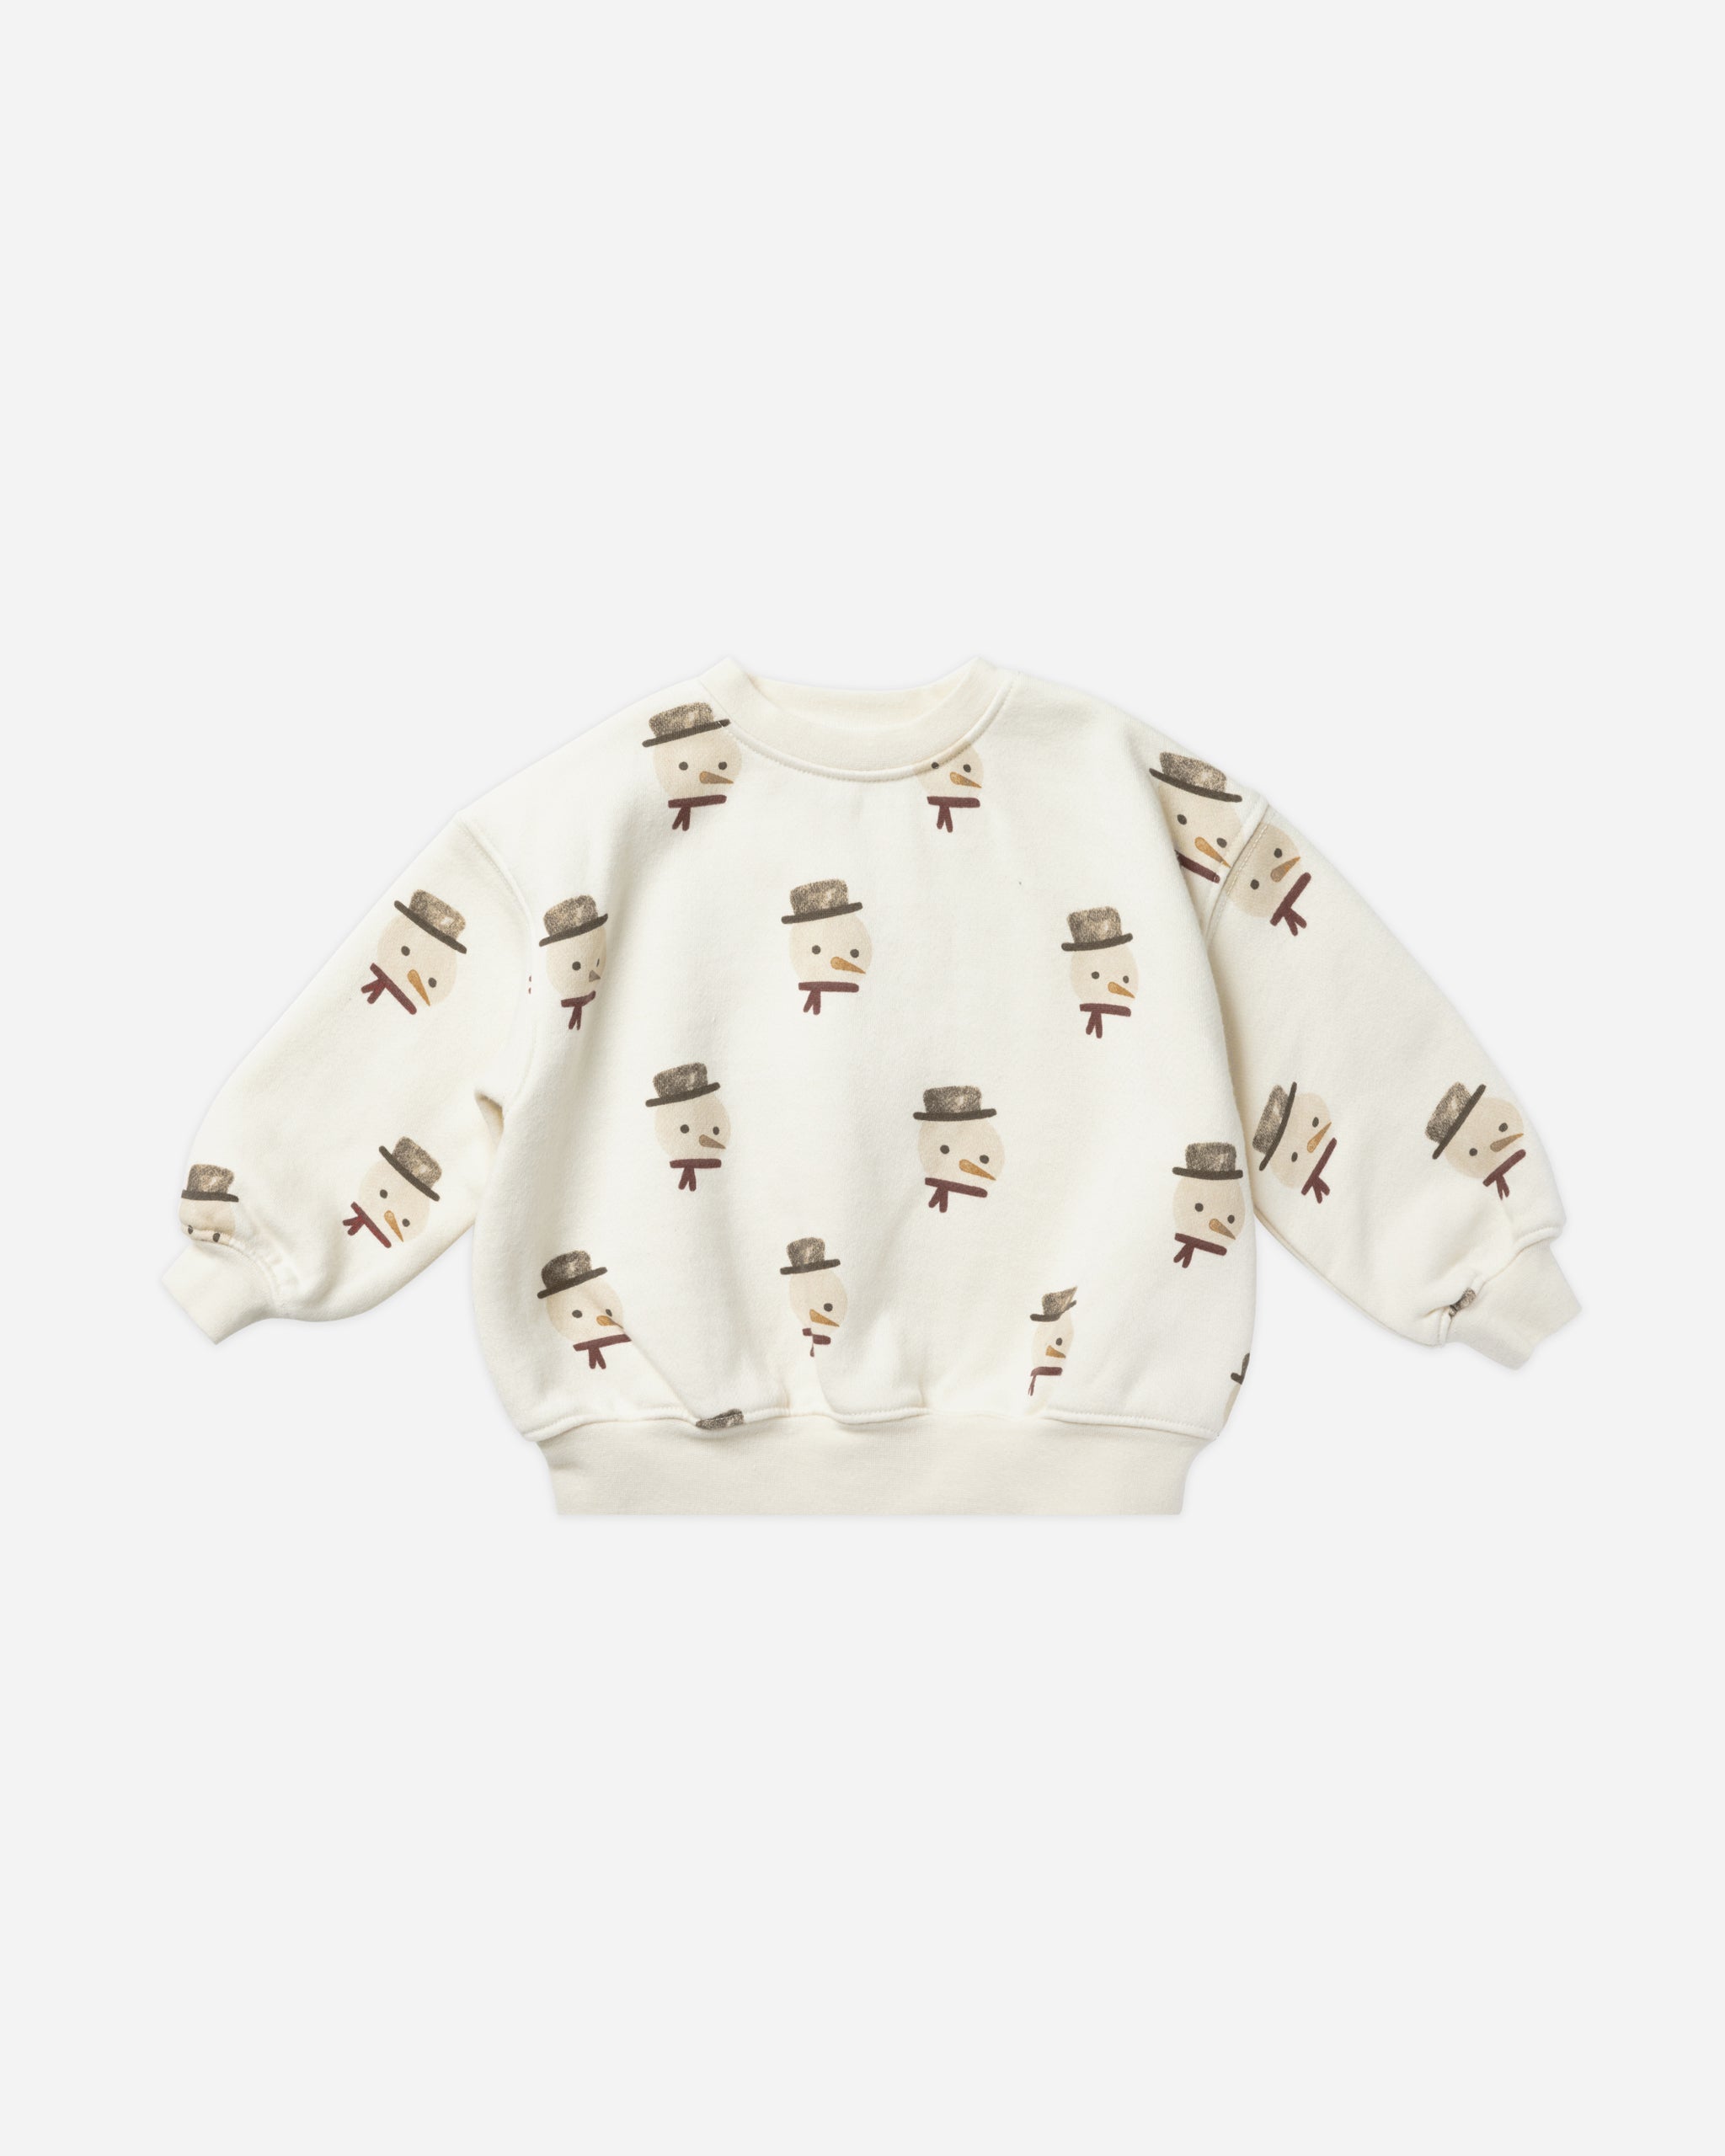 Relaxed Sweatshirt || Snowman - Rylee + Cru | Kids Clothes | Trendy Baby Clothes | Modern Infant Outfits |